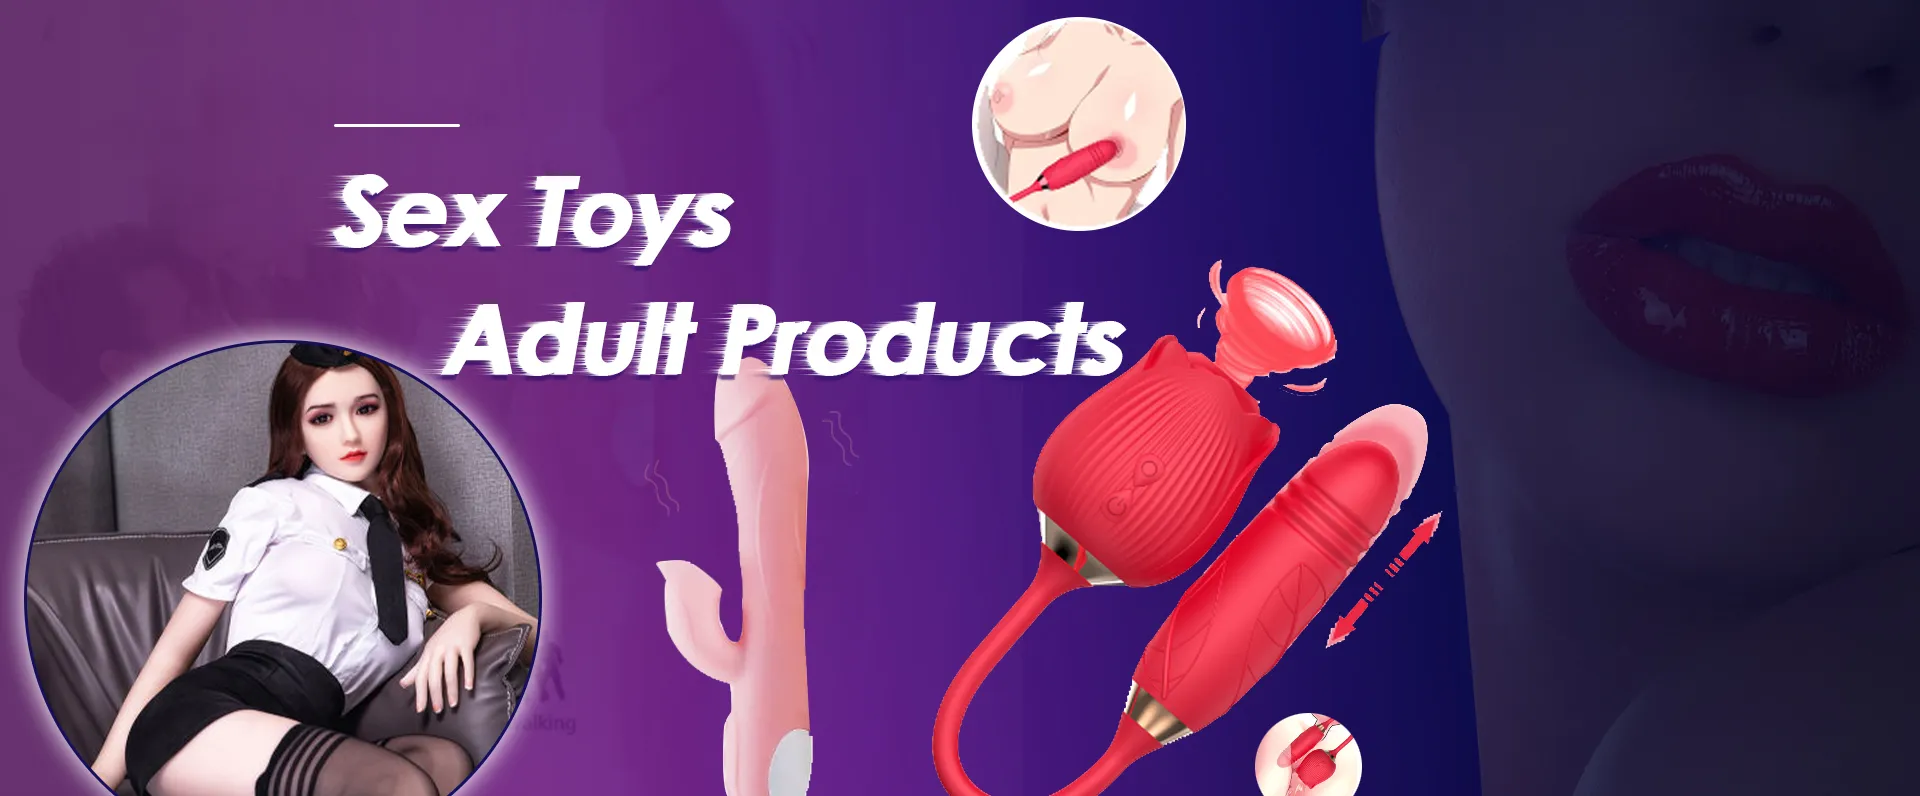 Sex Toys, Adult products